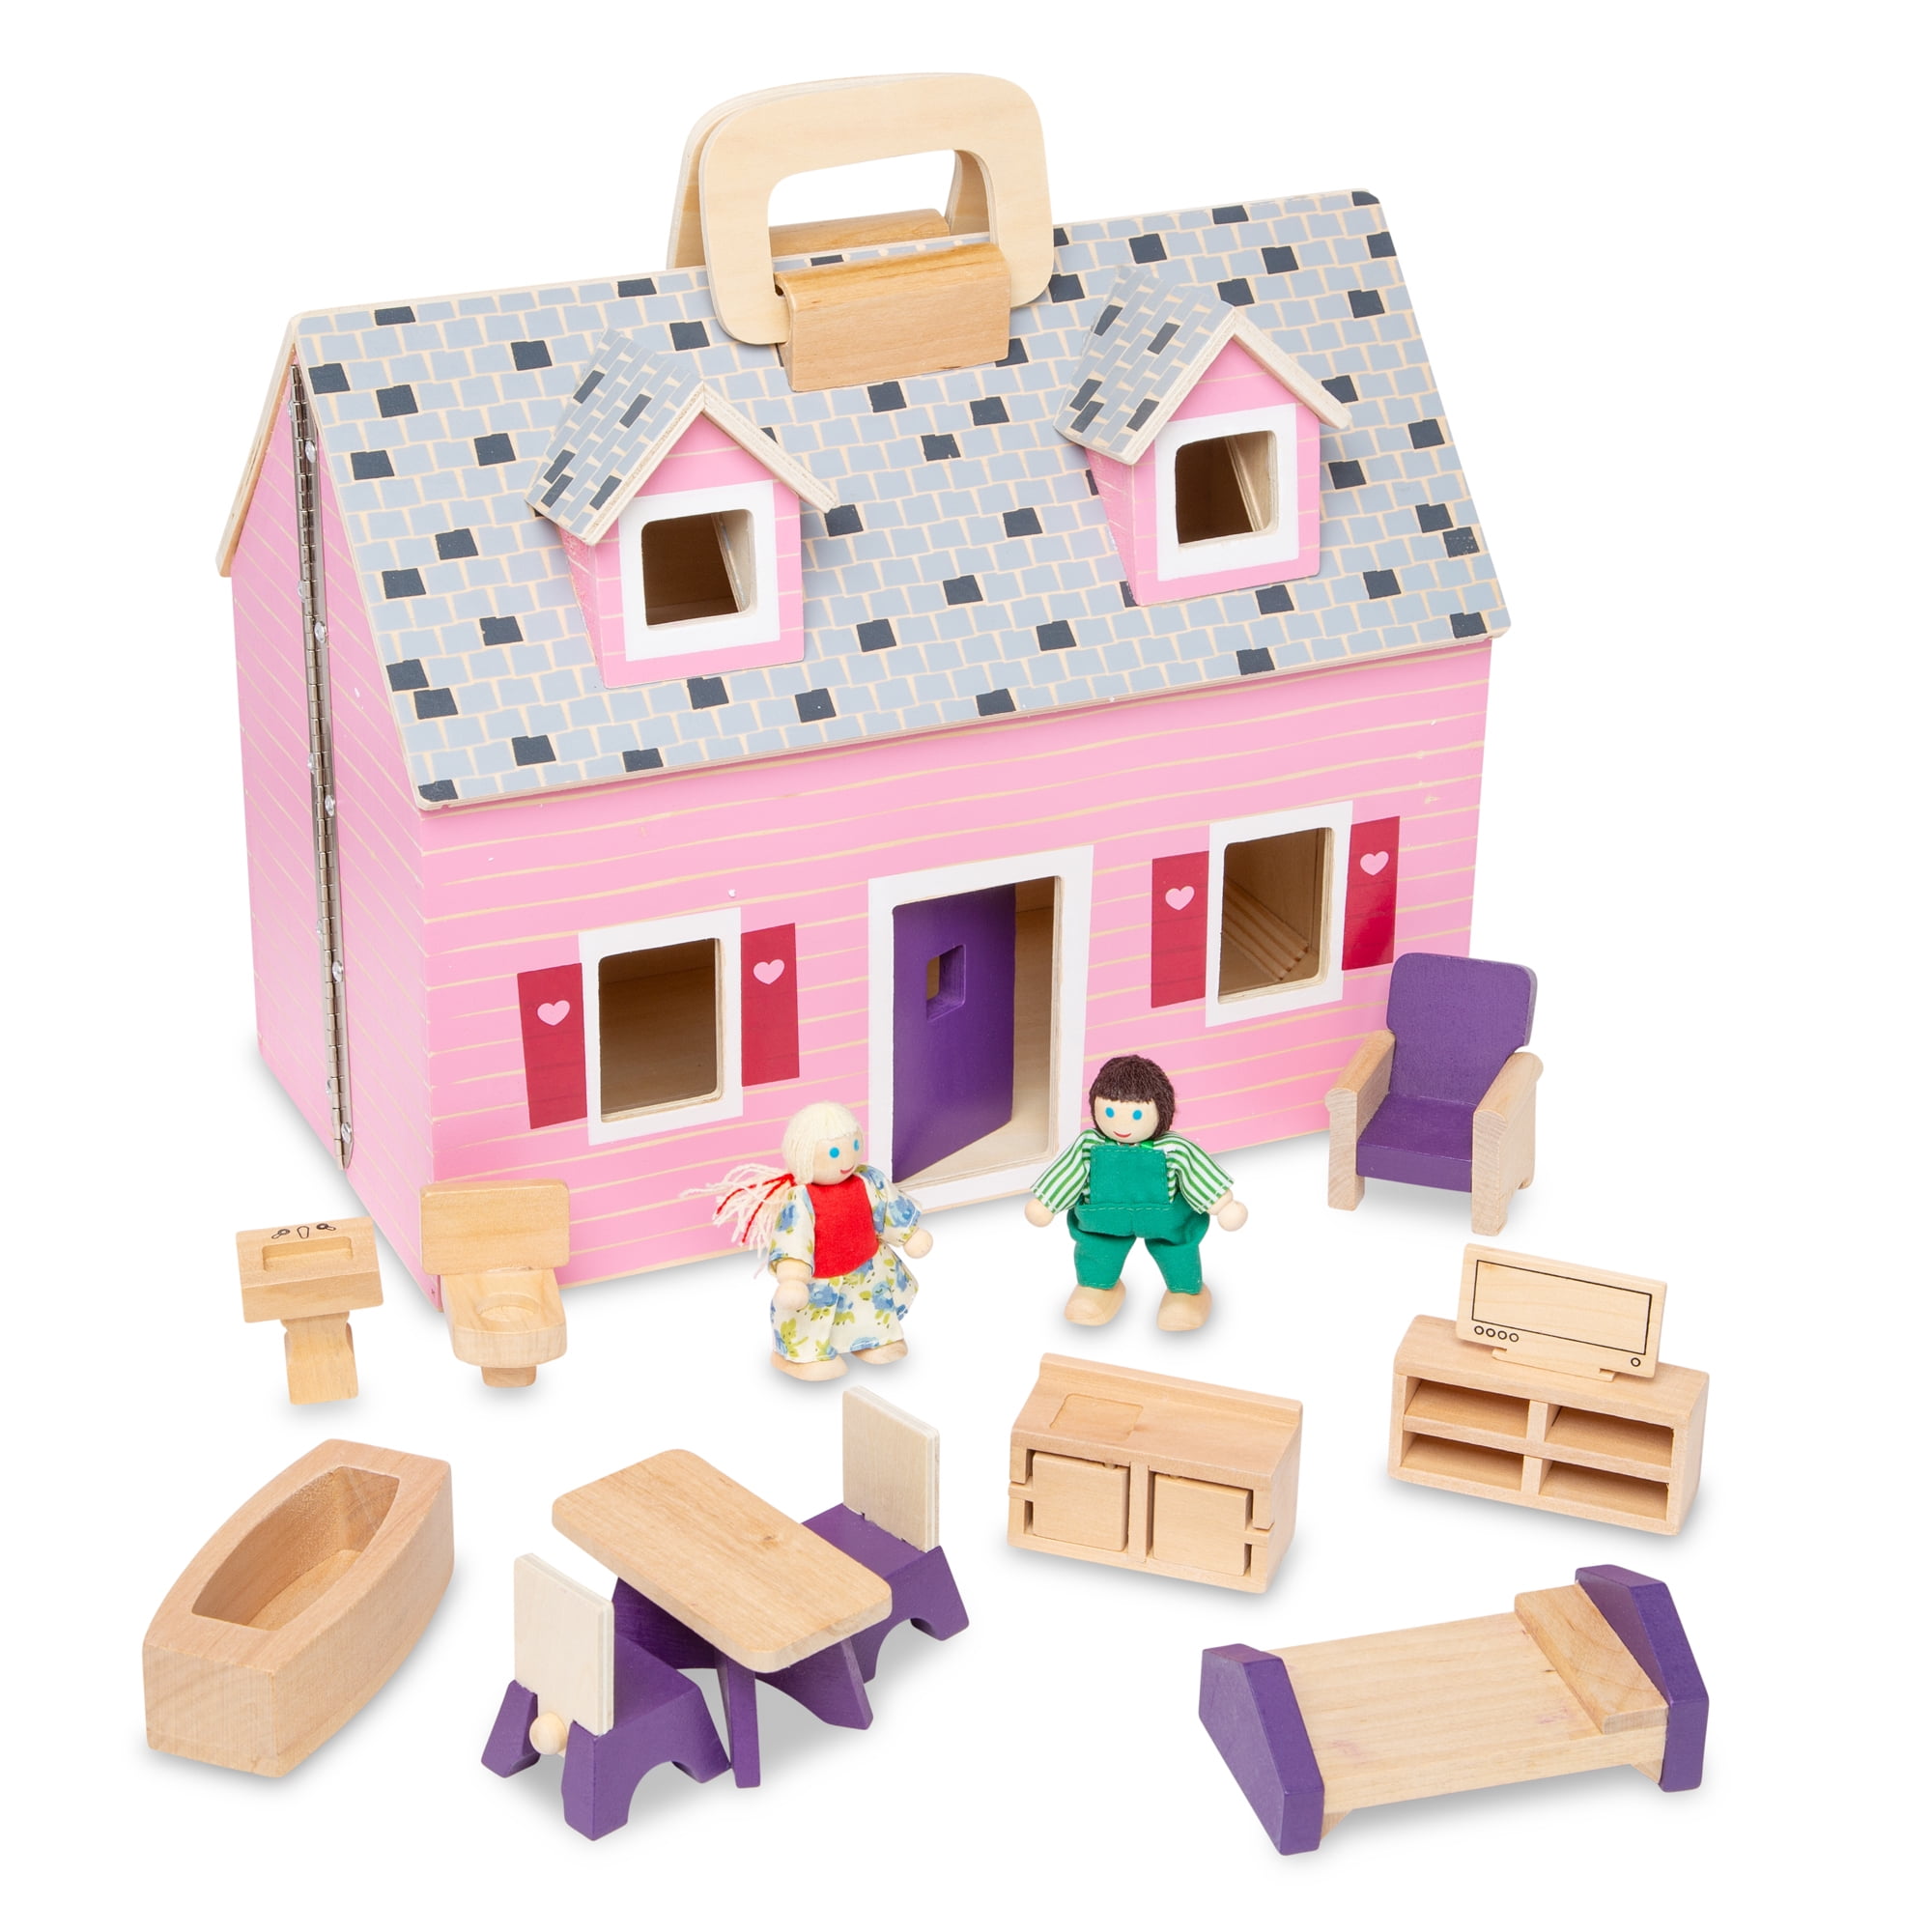 Melissa Doug Wood Poseable Figures Family Doll House People Dollhouses 7 Pc Toy 